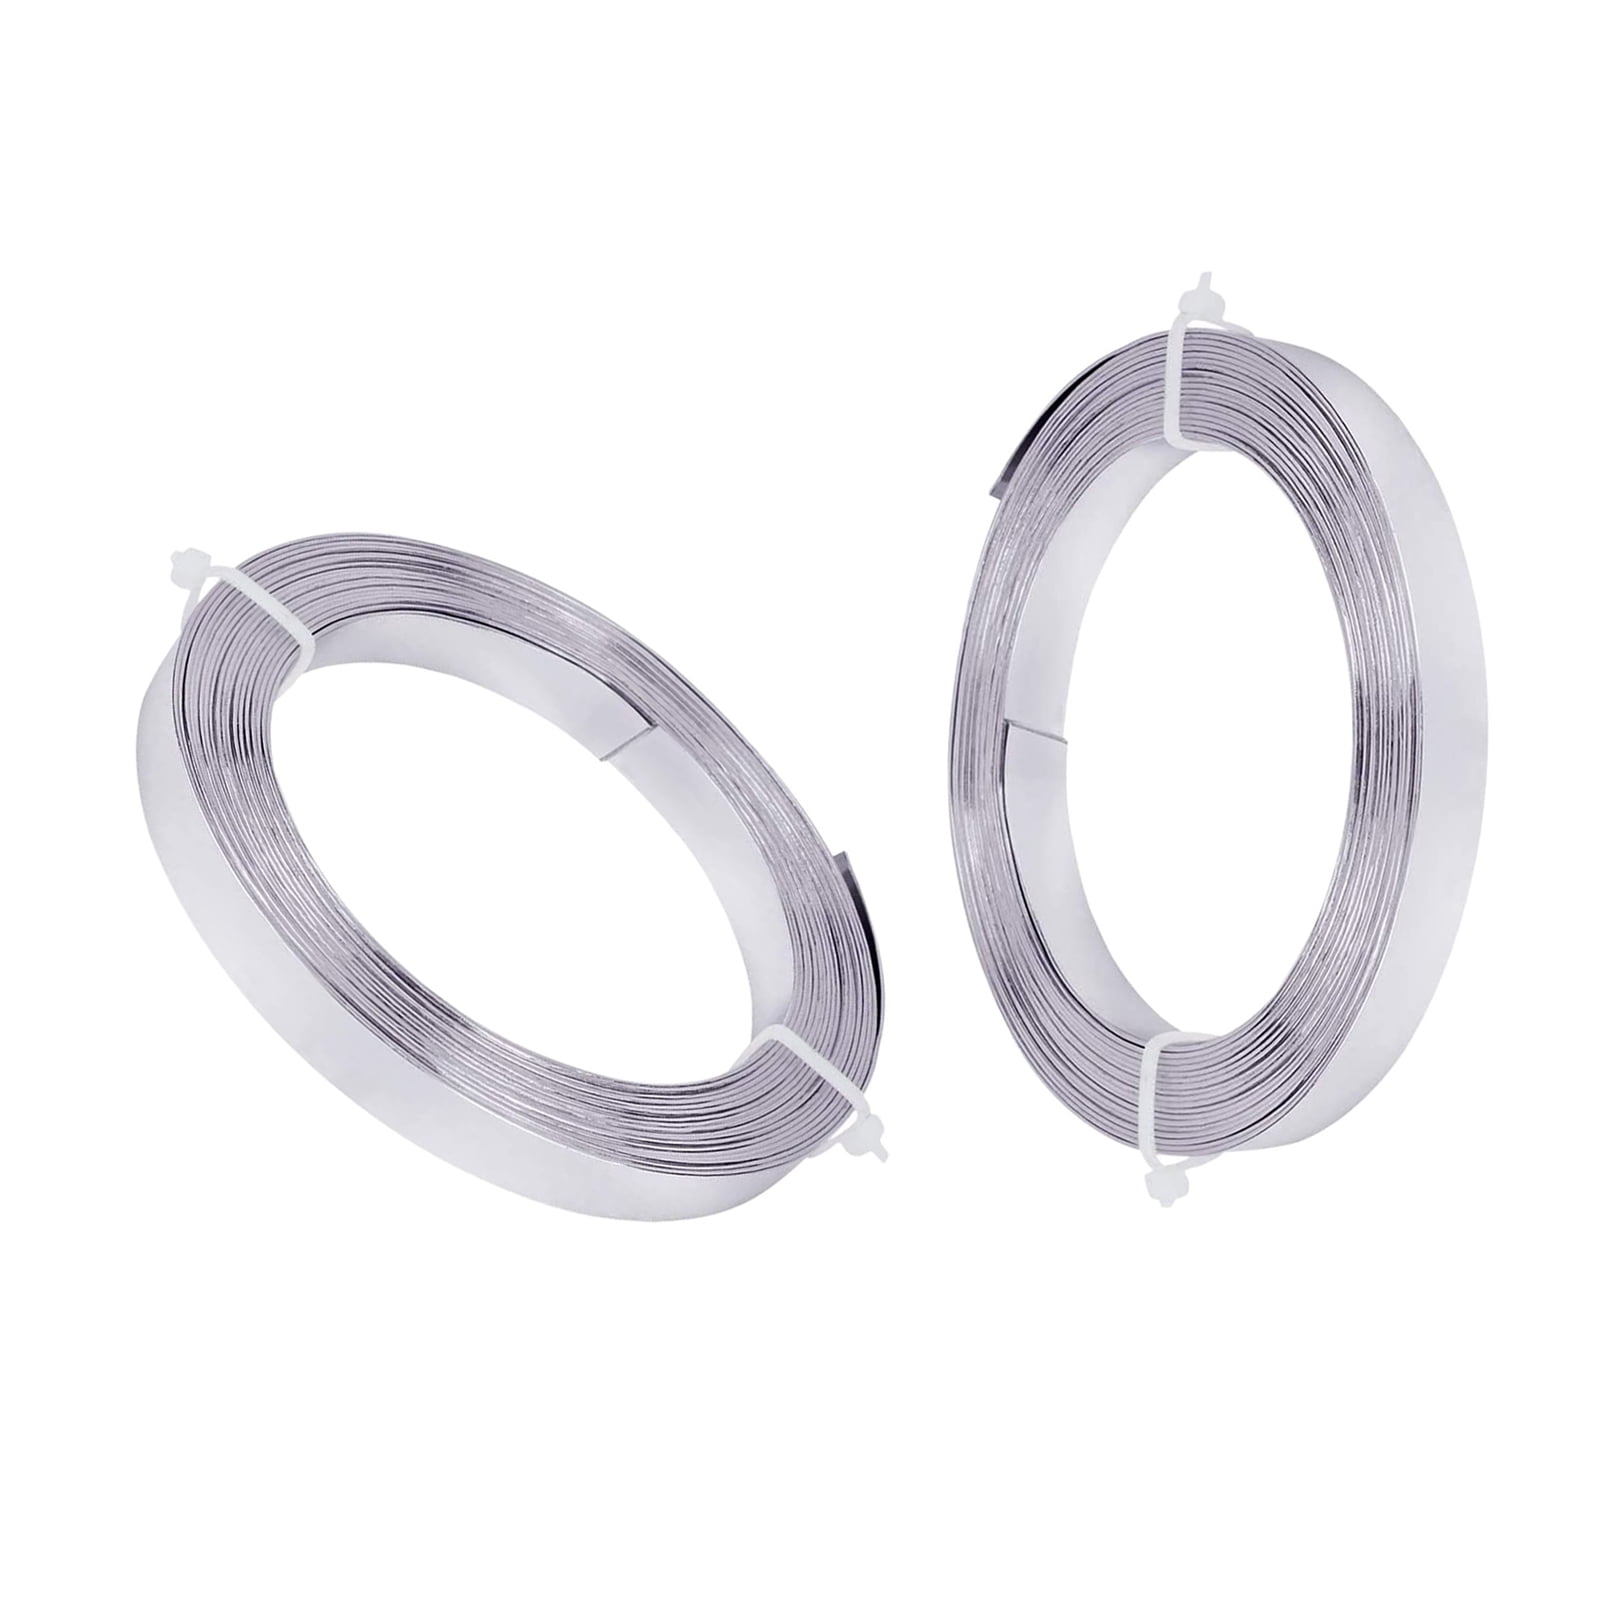 Aluminum Flat Wire Jewelry Making Bendable Bezel Strip Ring Metal Wire